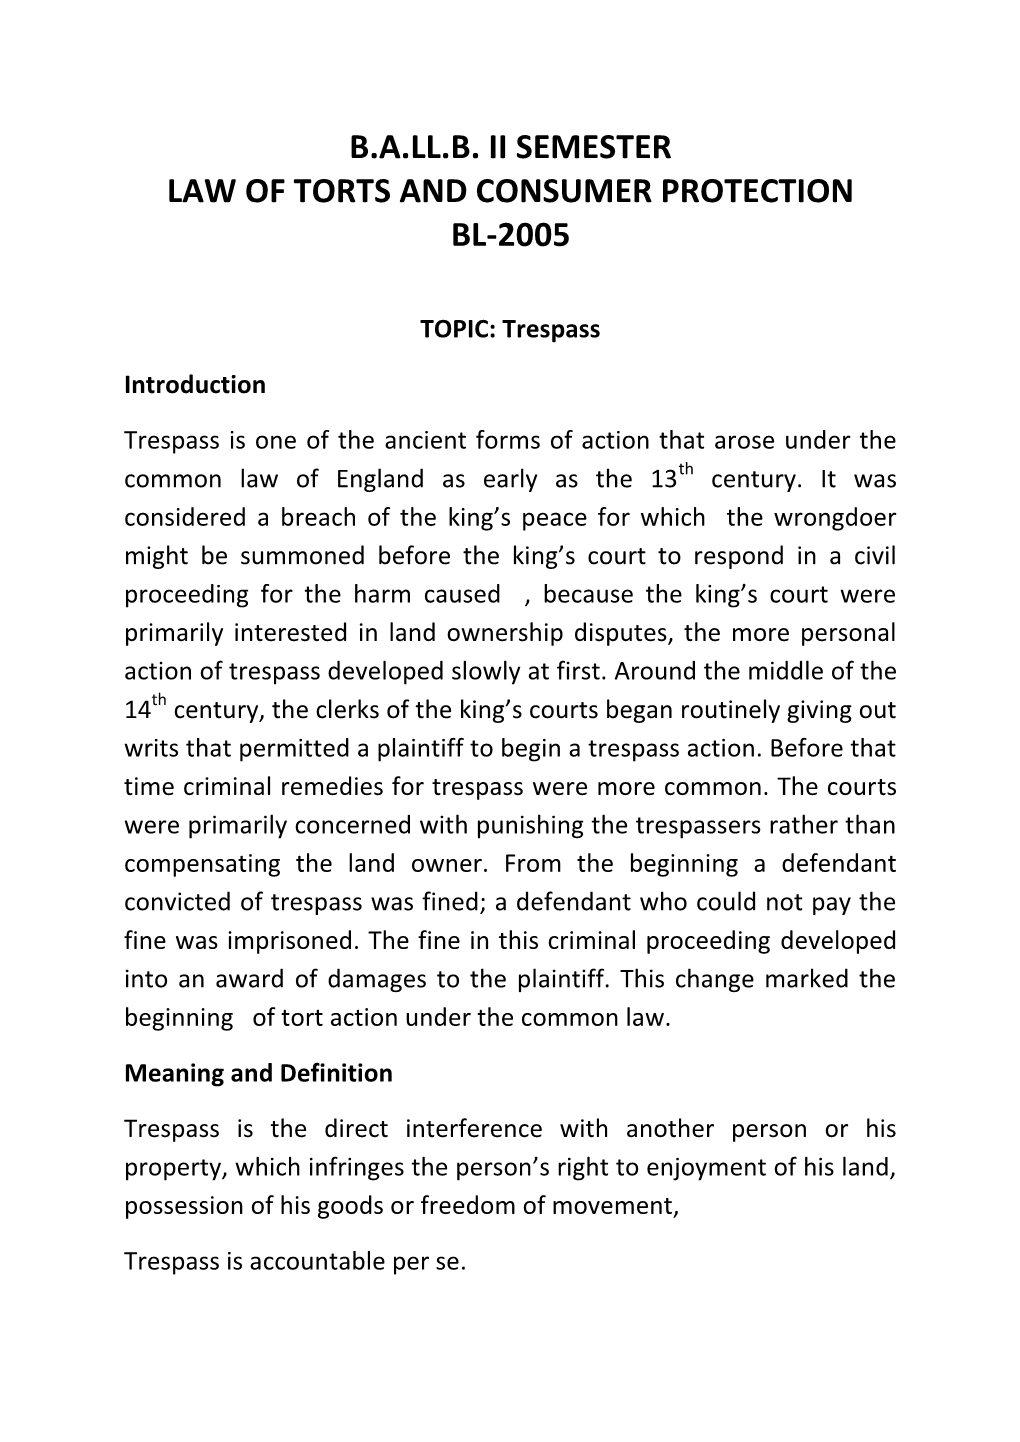 Law of Torts and Consumer Protection Bl-2005